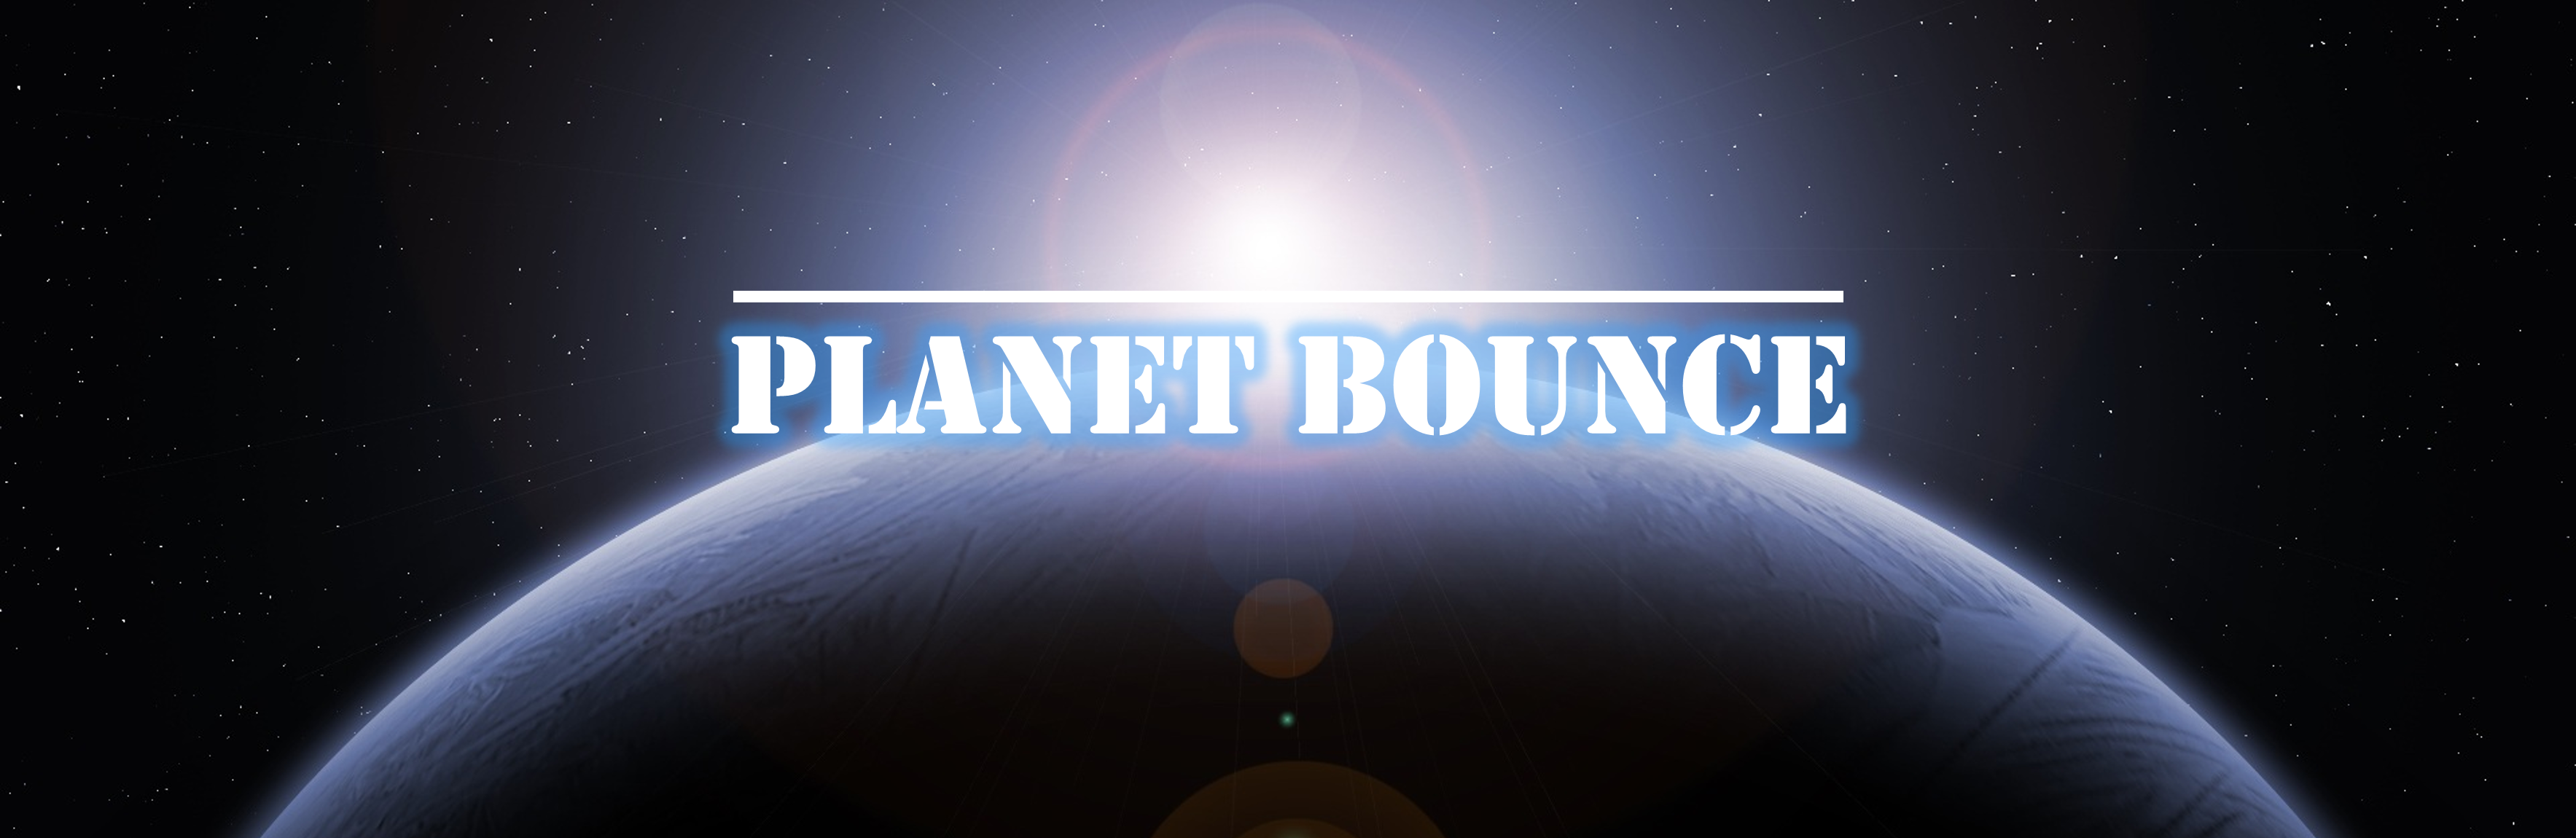 New Game for PC - Planet